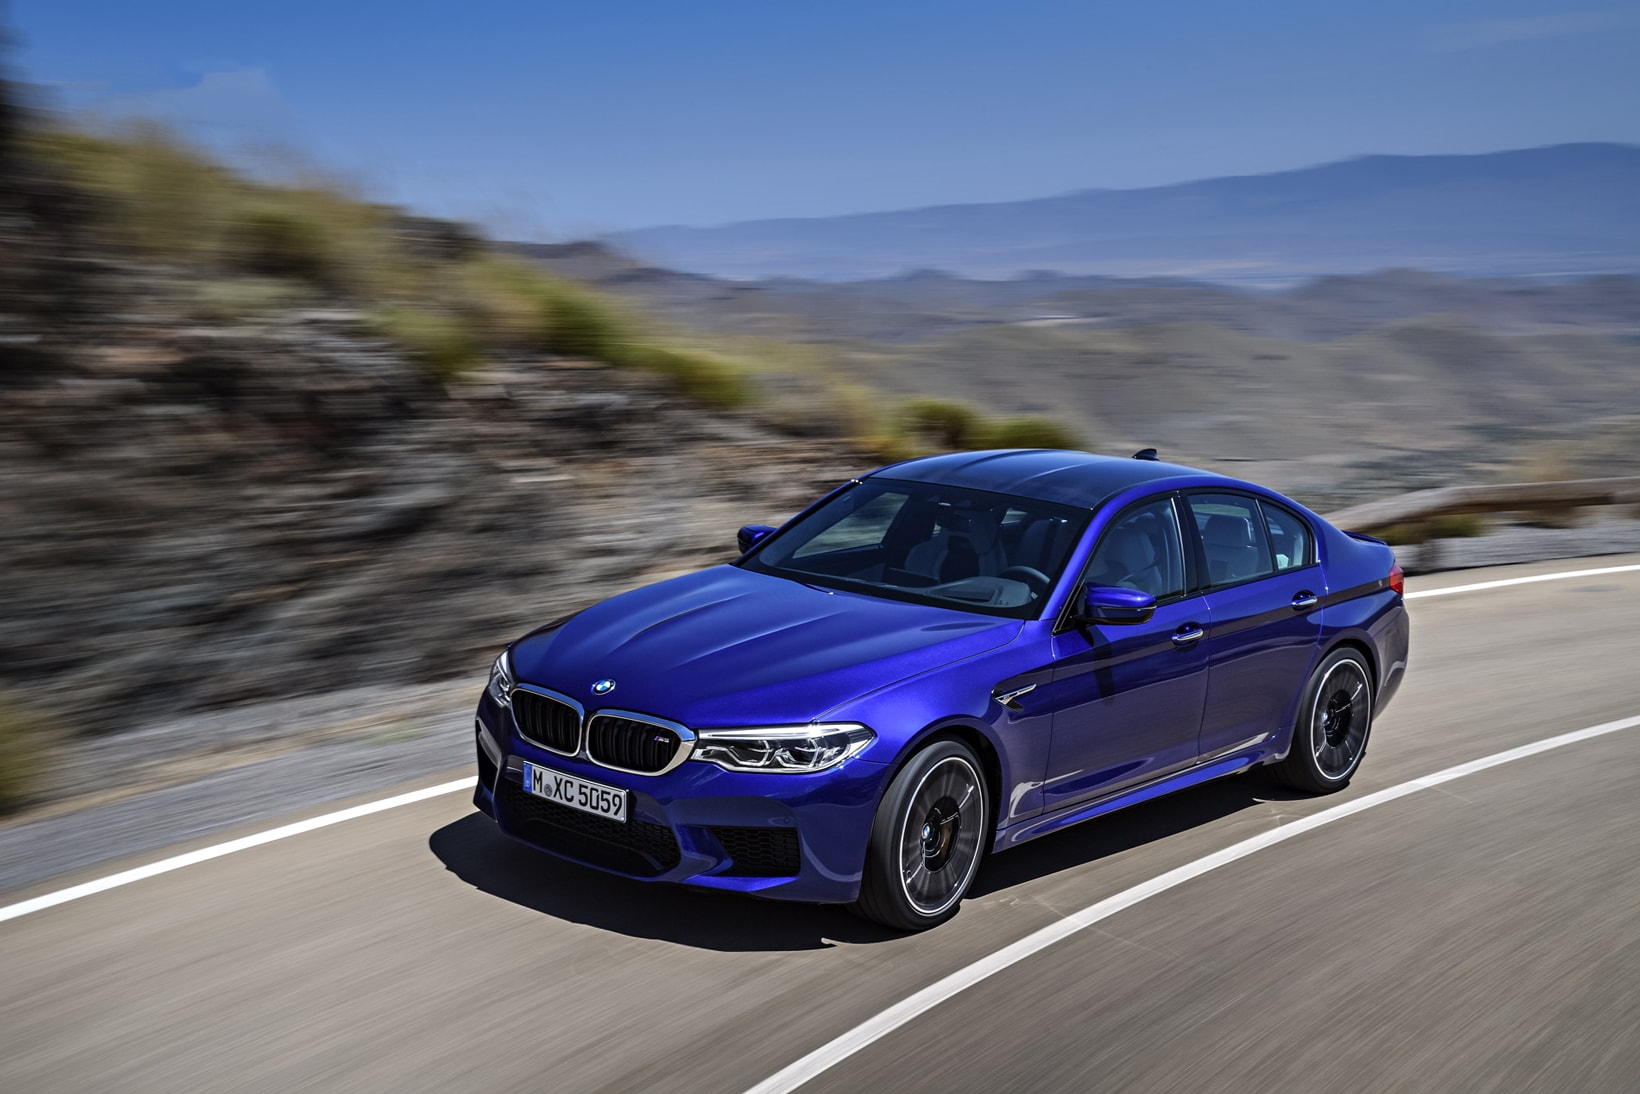 BMW 2018 M5 Debut F90 Generation car auto automotive automobile blue pictures specs specifications awd all wheel drive